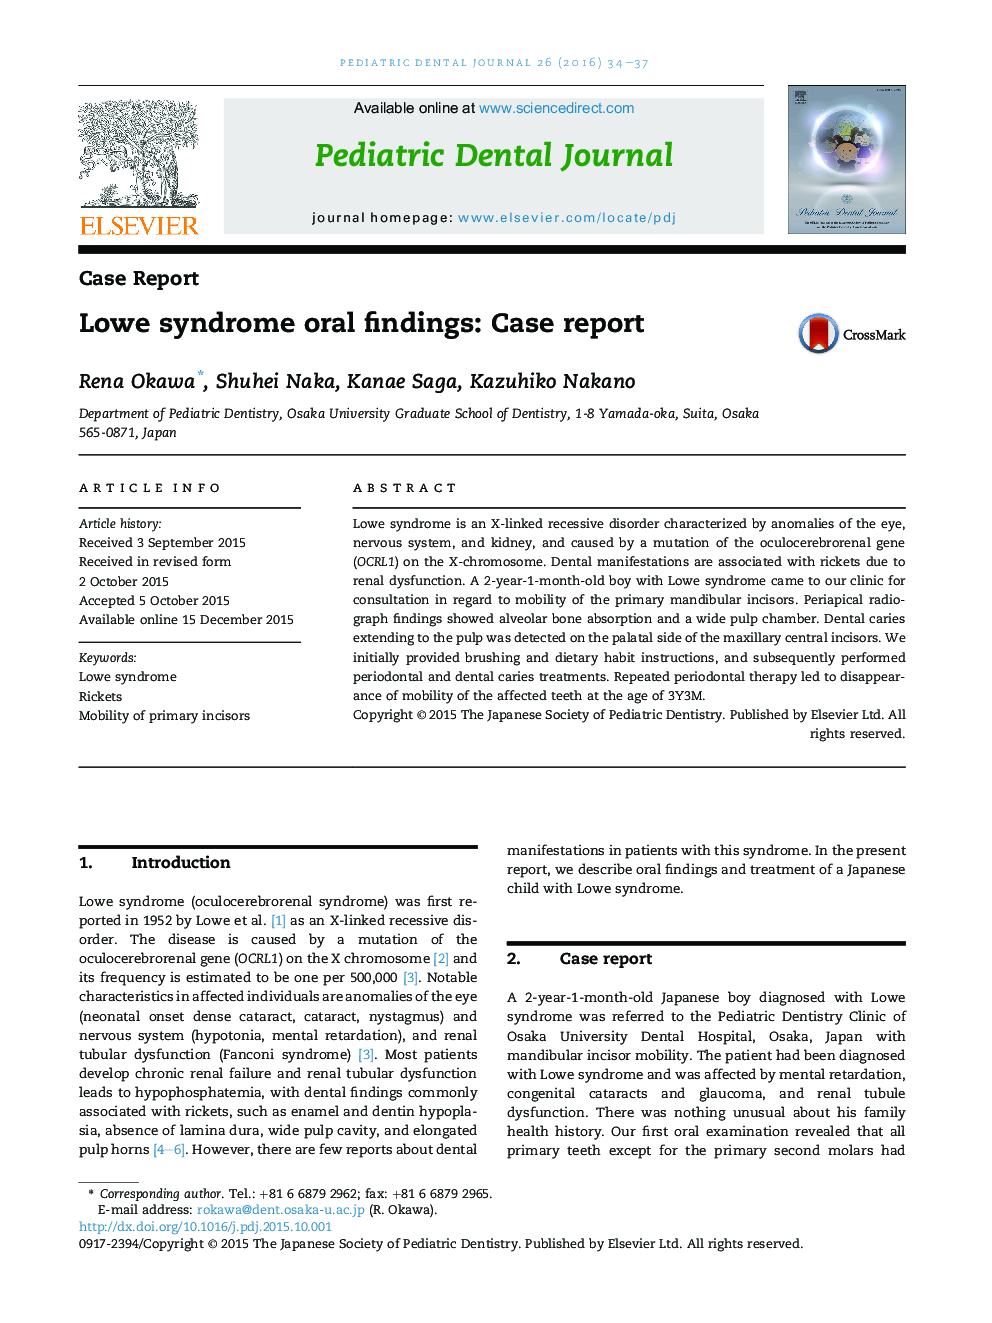 Lowe syndrome oral findings: Case report